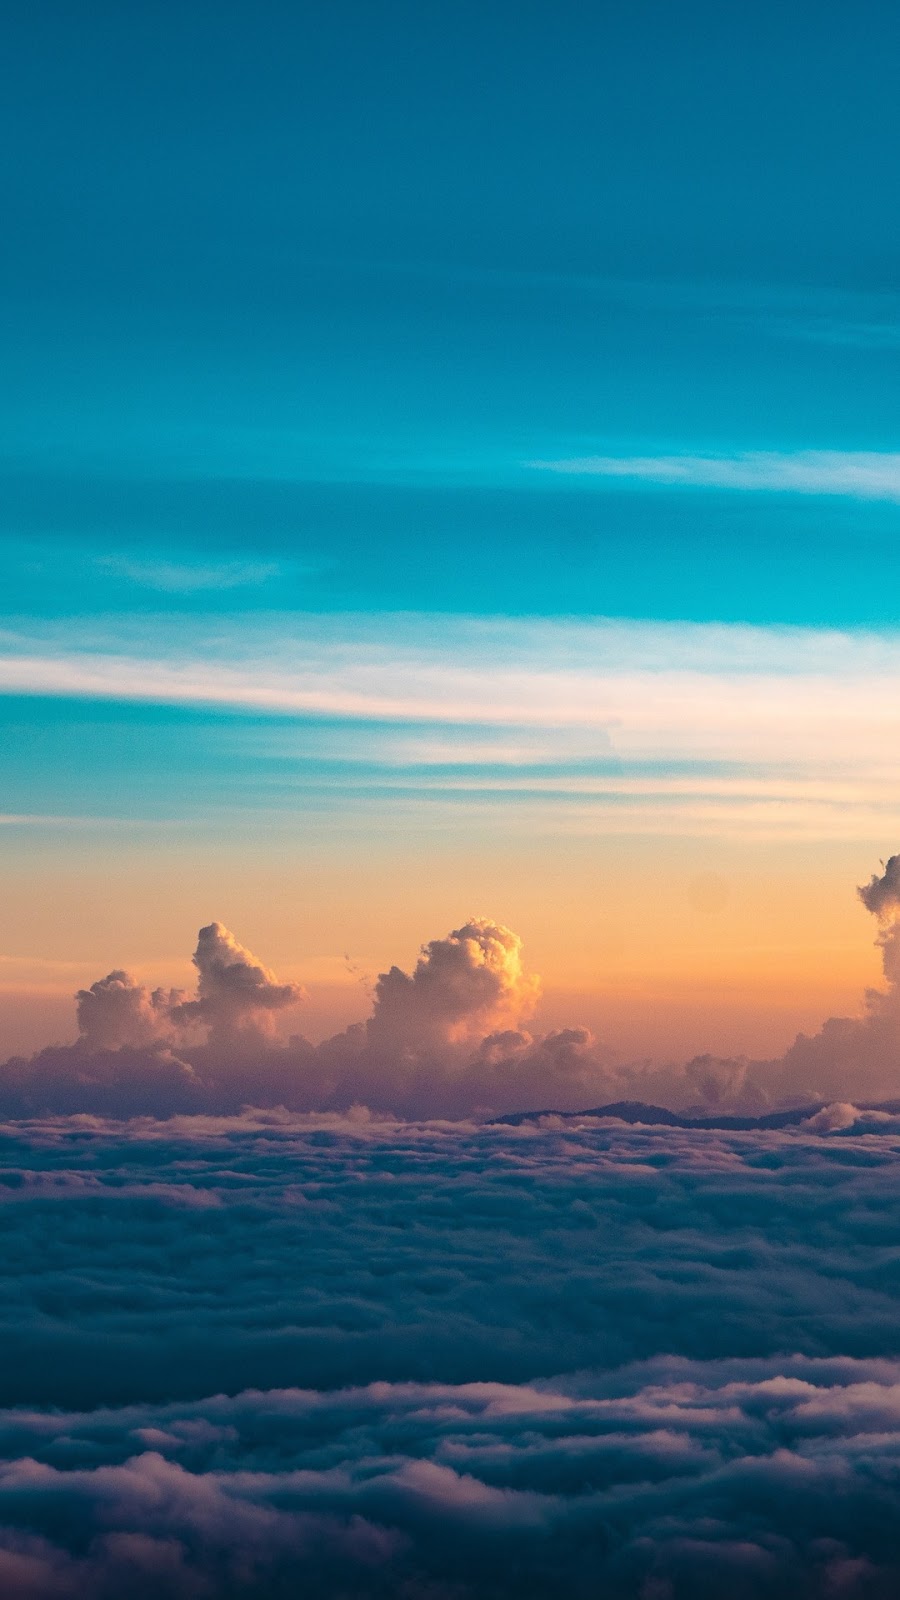 Download Wallpaper Sunset Above the Clouds, Hd, iPhone Images. 